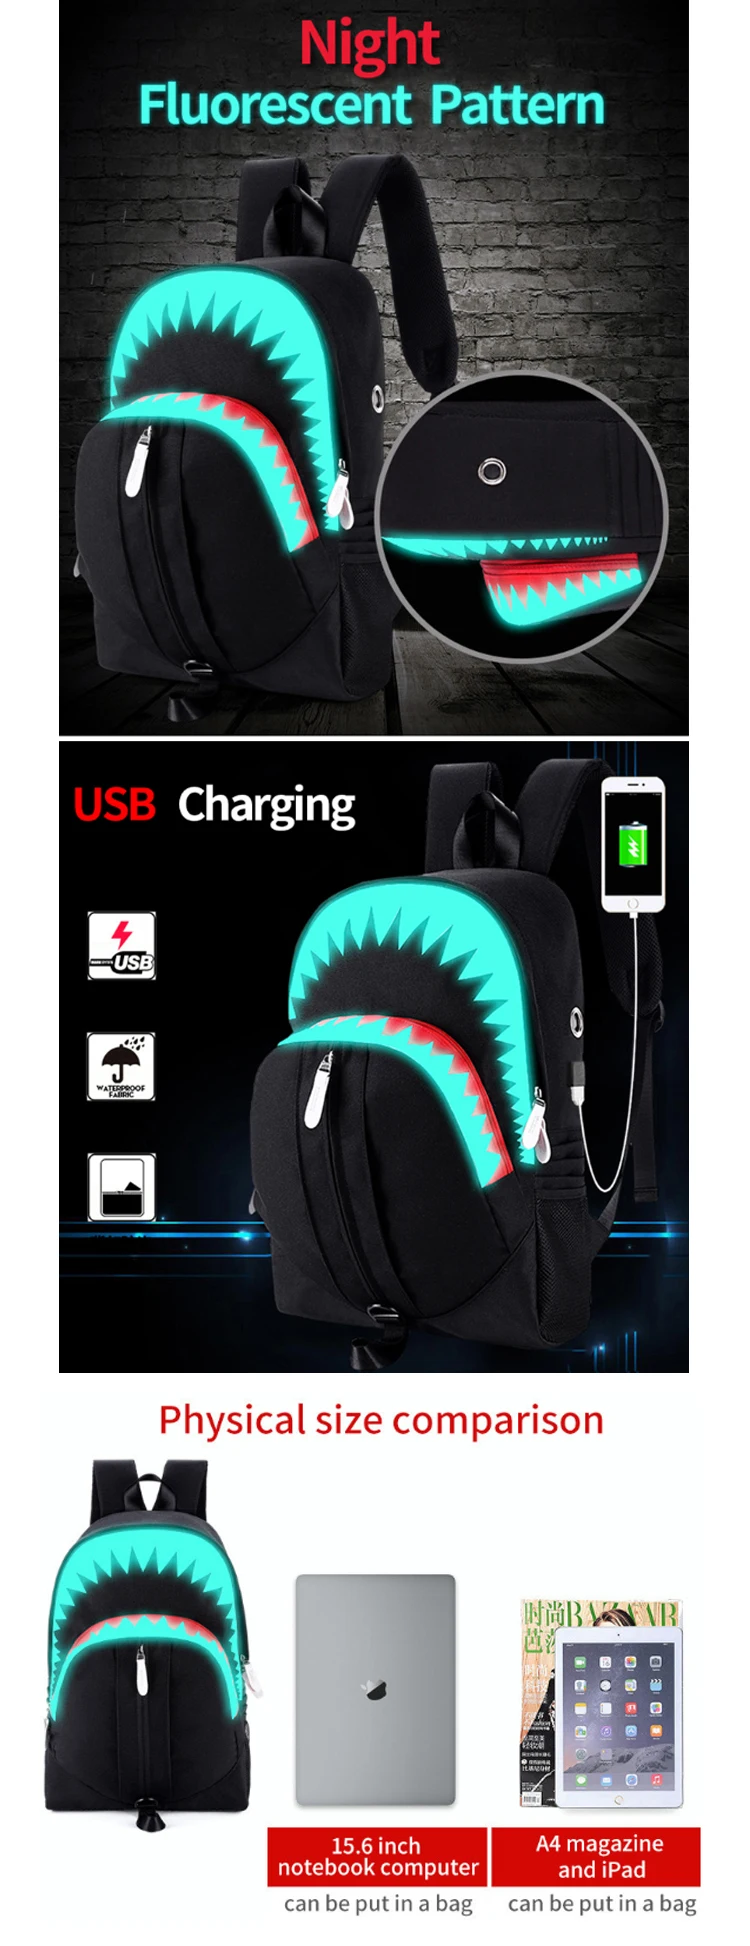 Osgoodway2 Big Mouth Shark Outdoor Safety Magic Luminous USB Charger School Backpack Bag